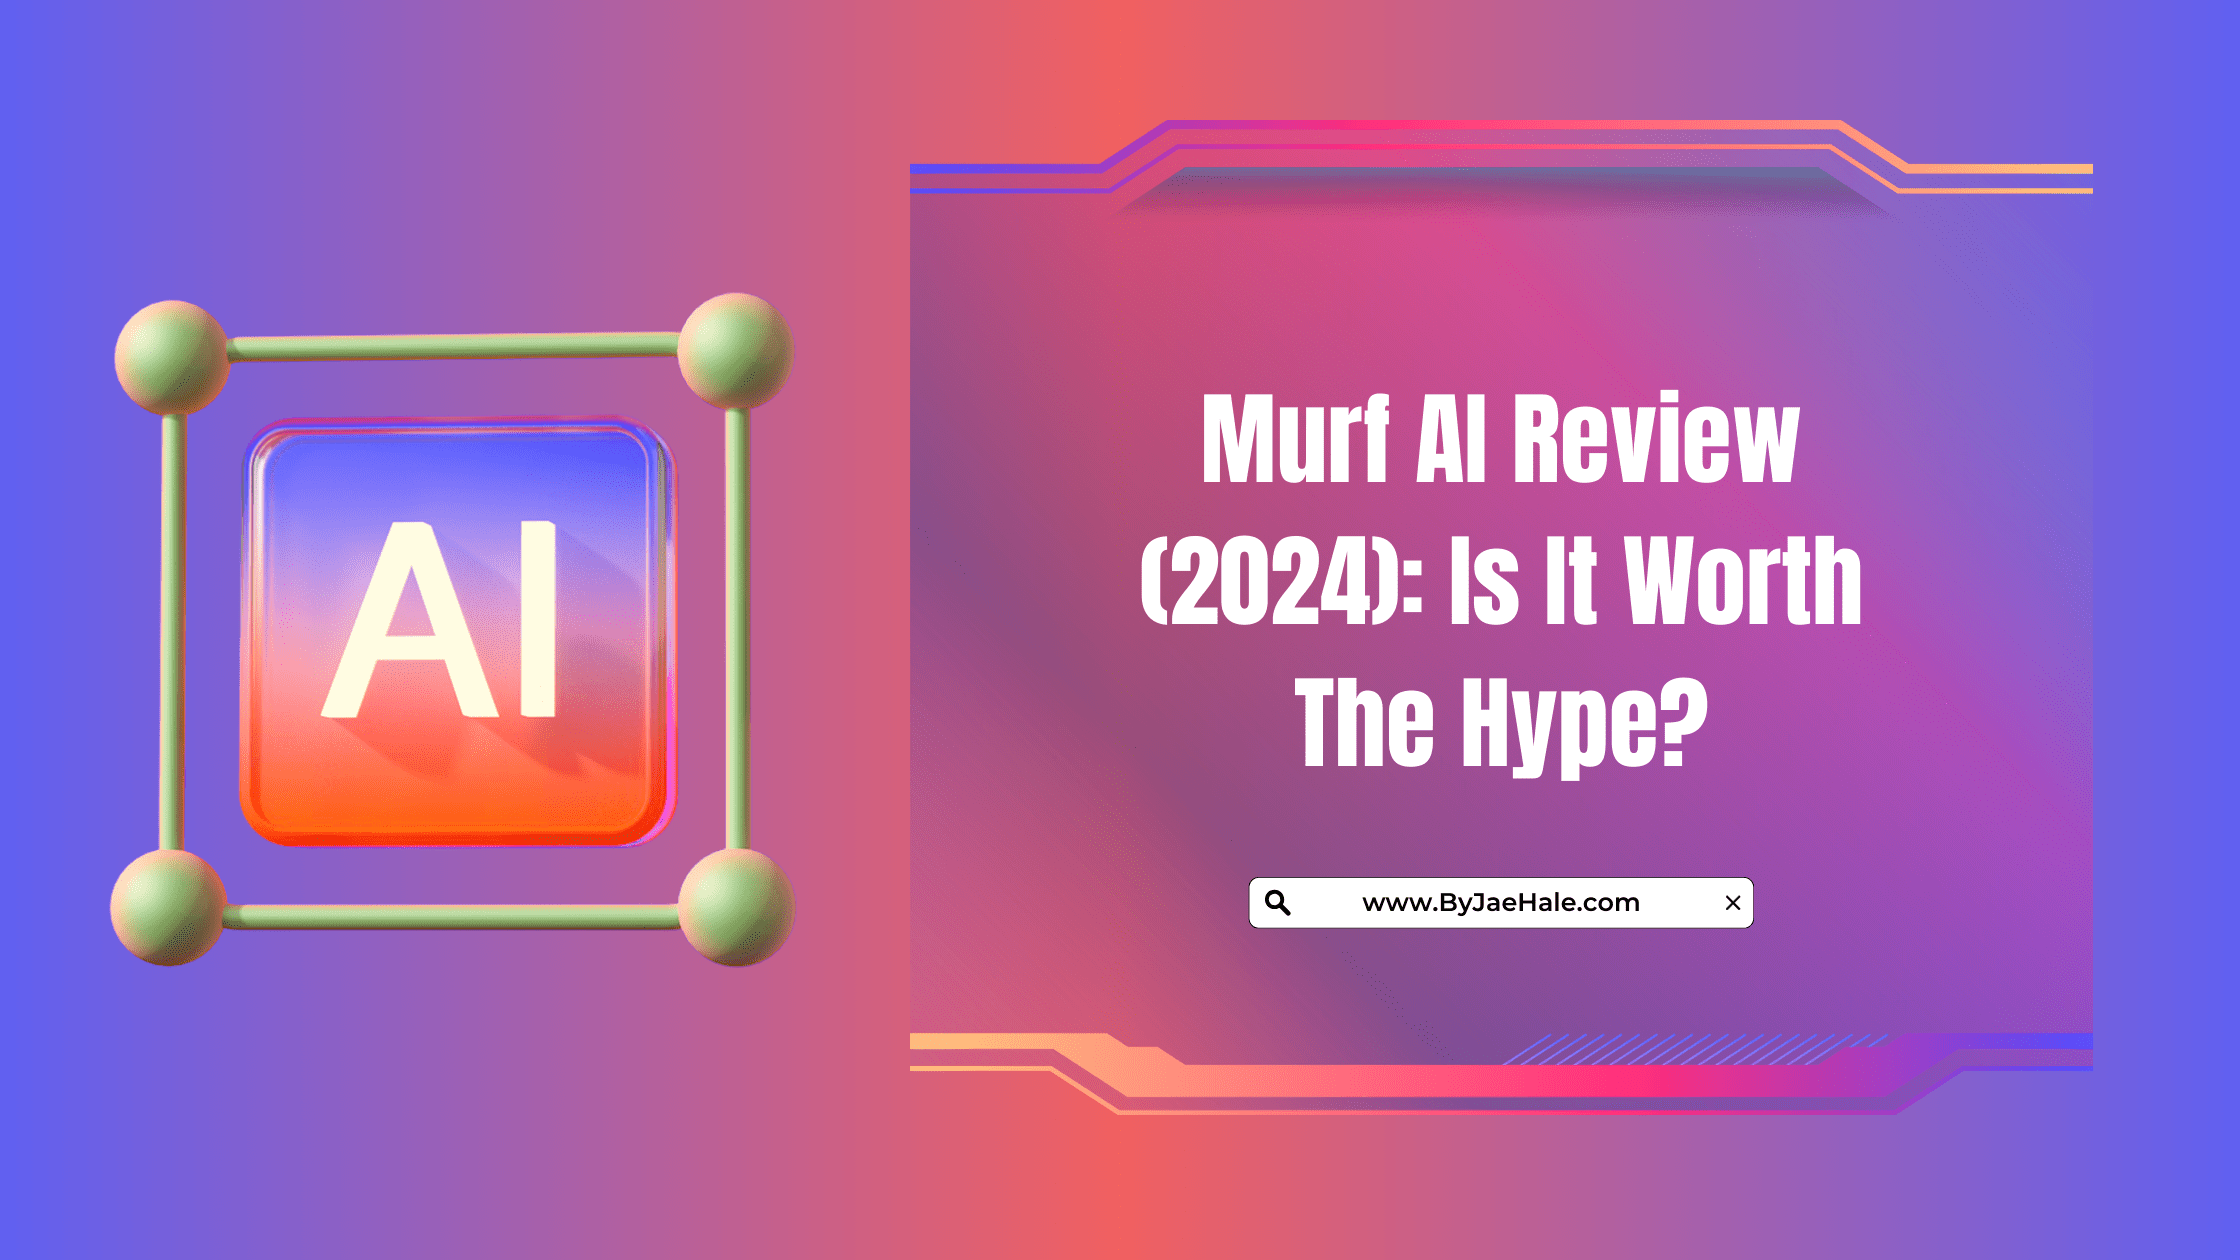 Murf AI Review 2024